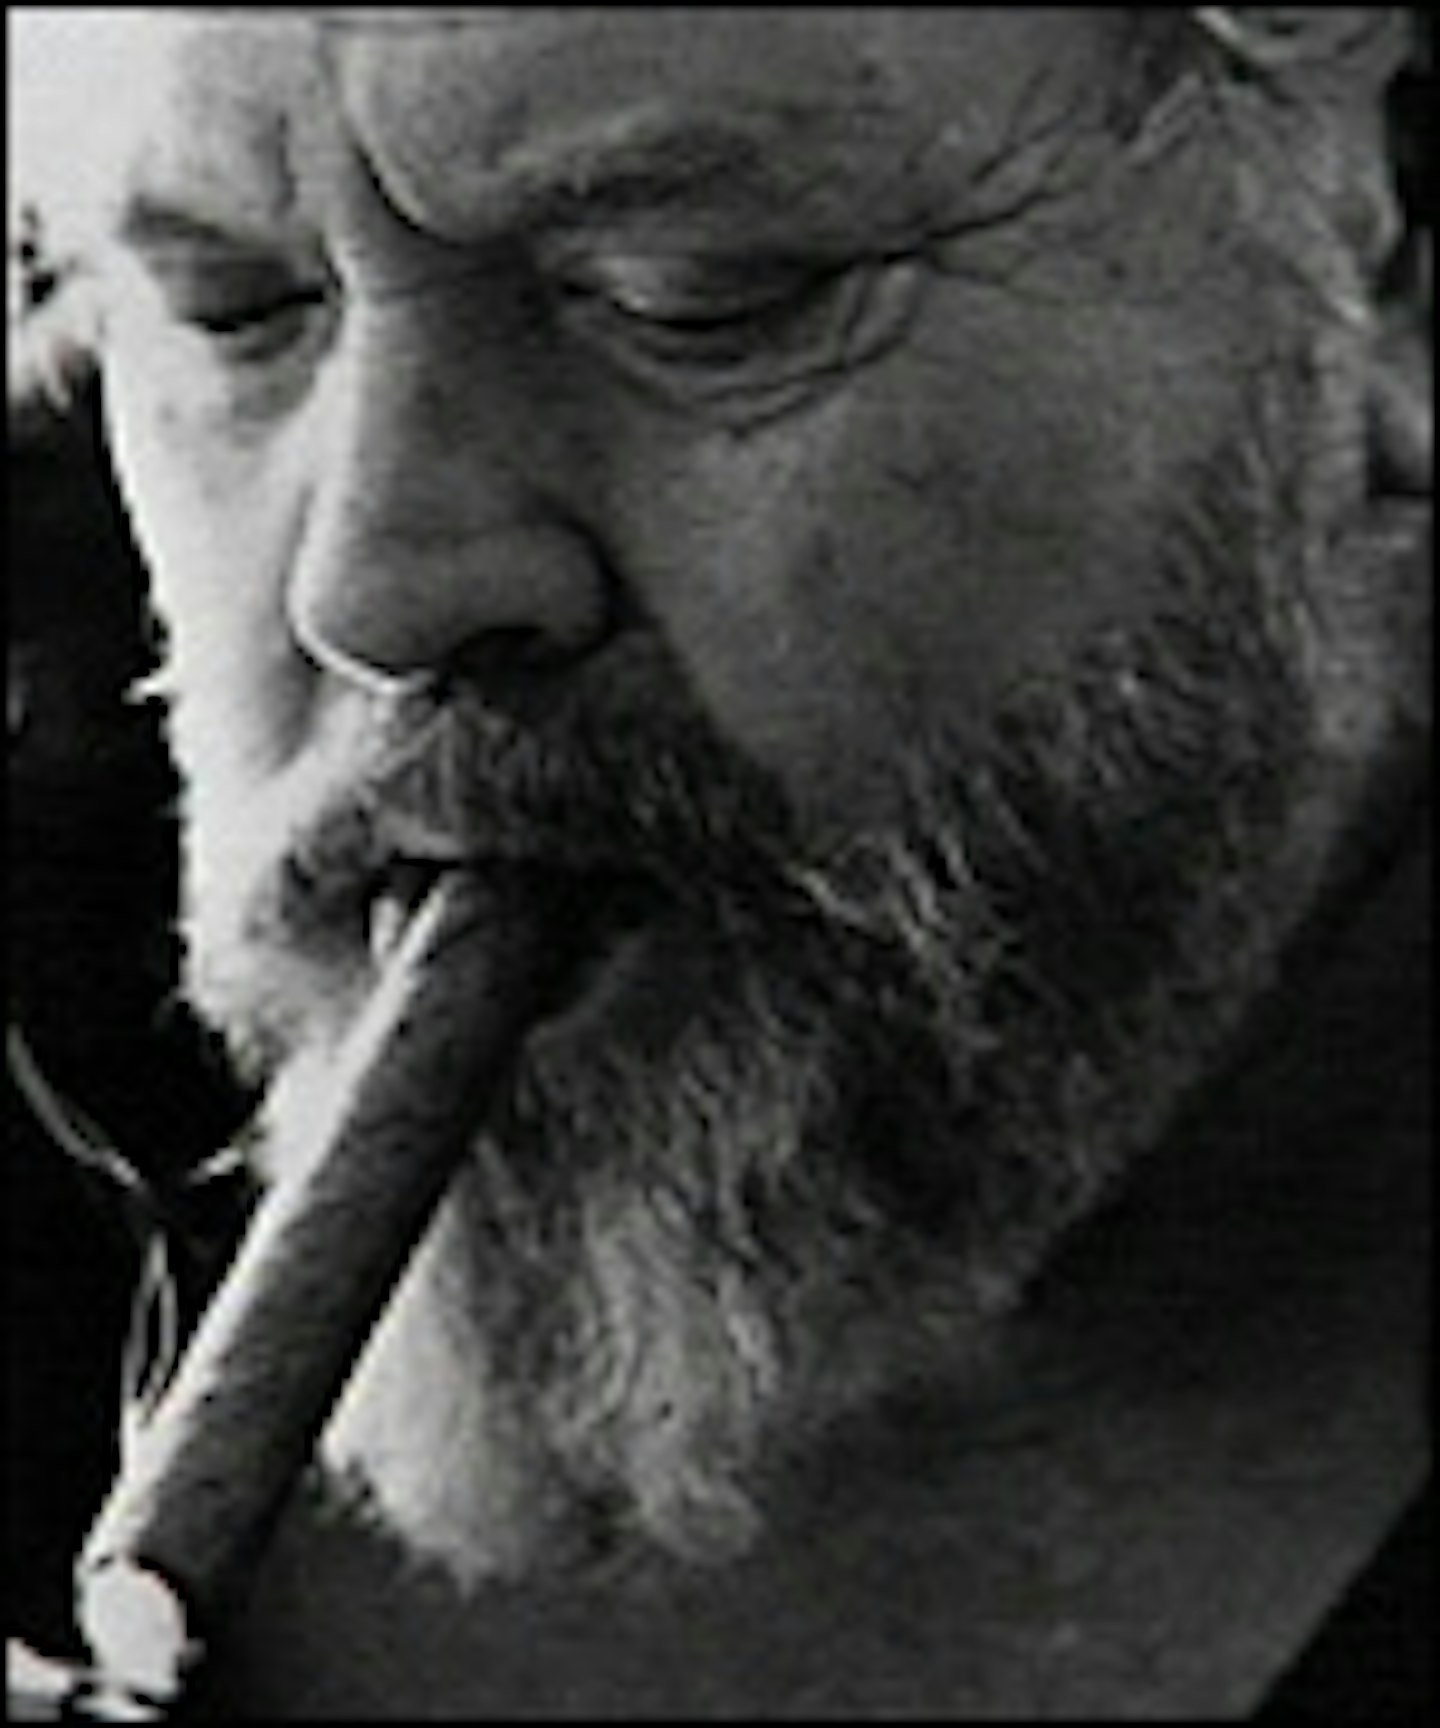 Lost Orson Welles Film To Be Released?